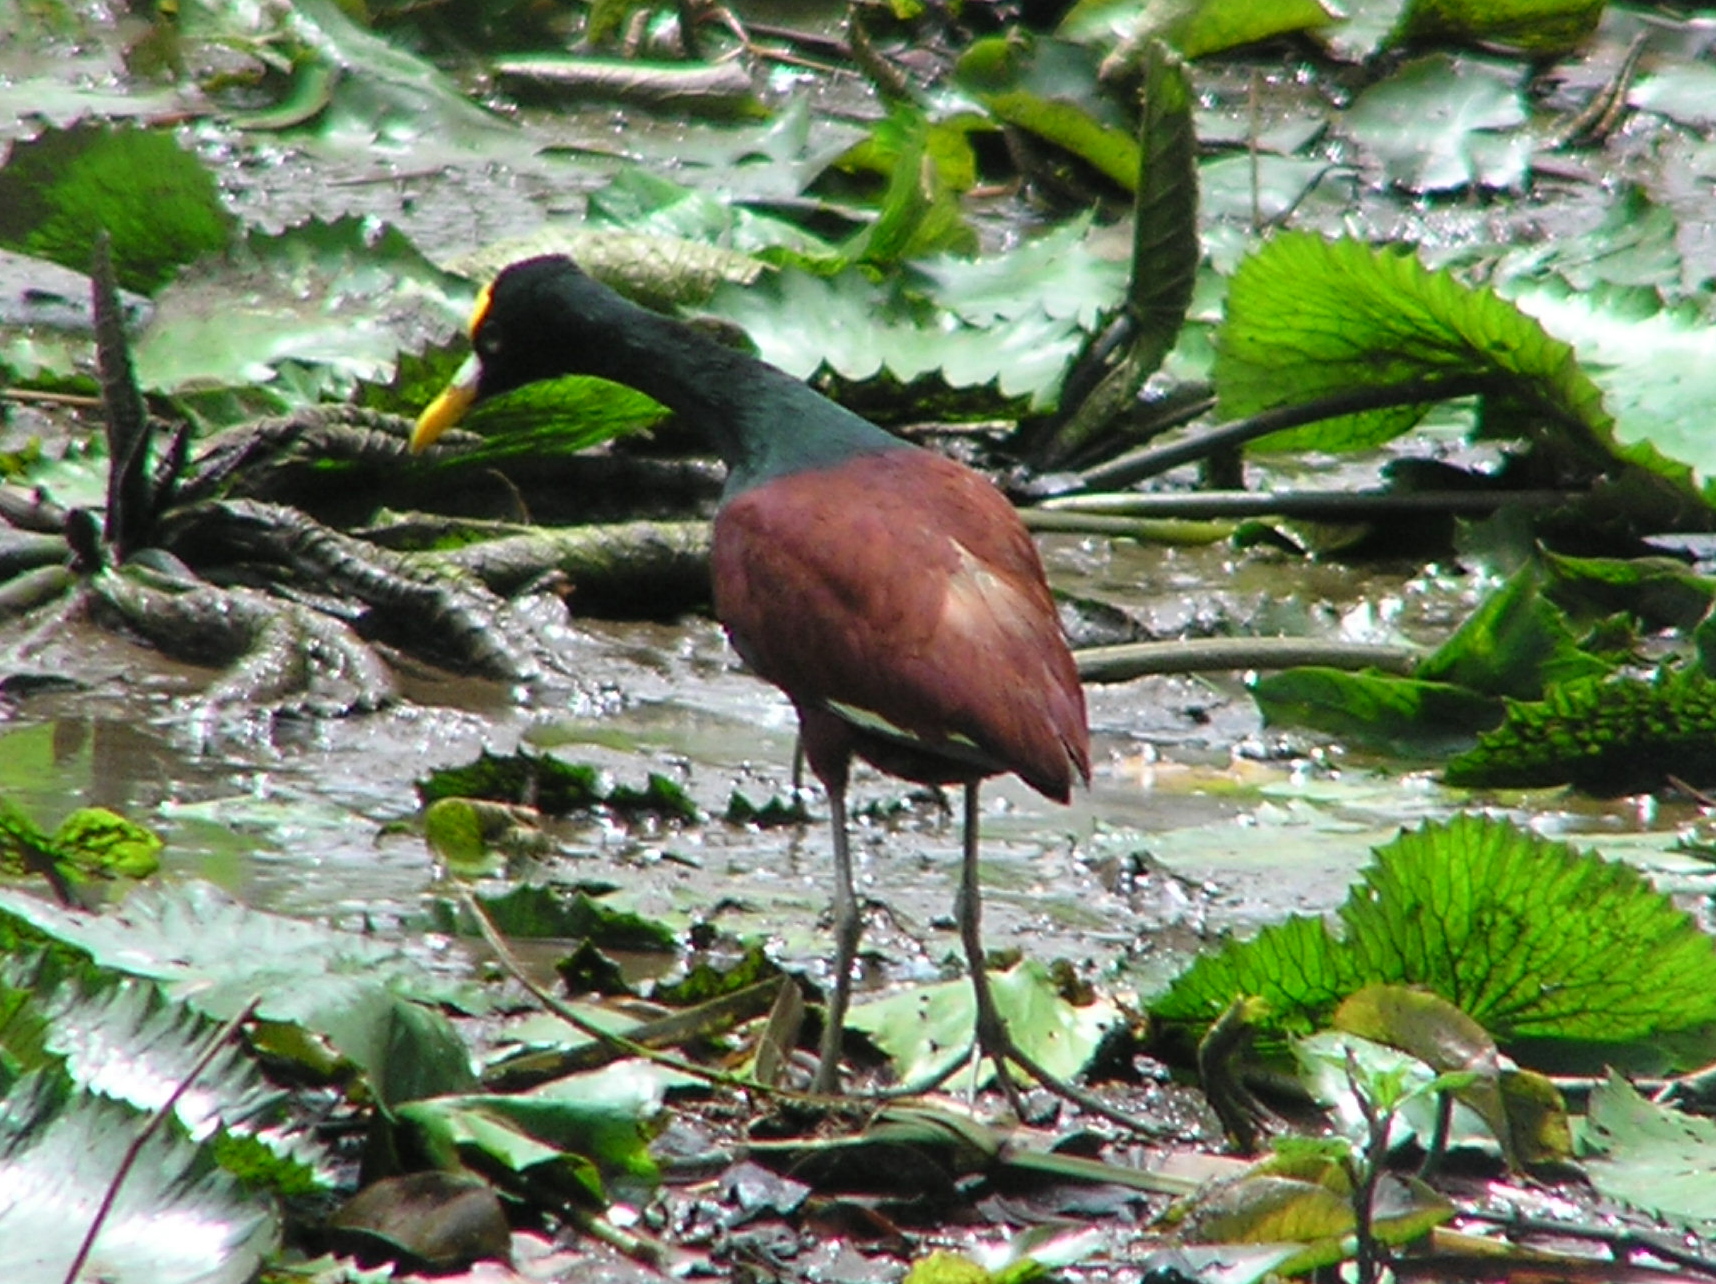 Click picture to see more Northern Jacana photos.